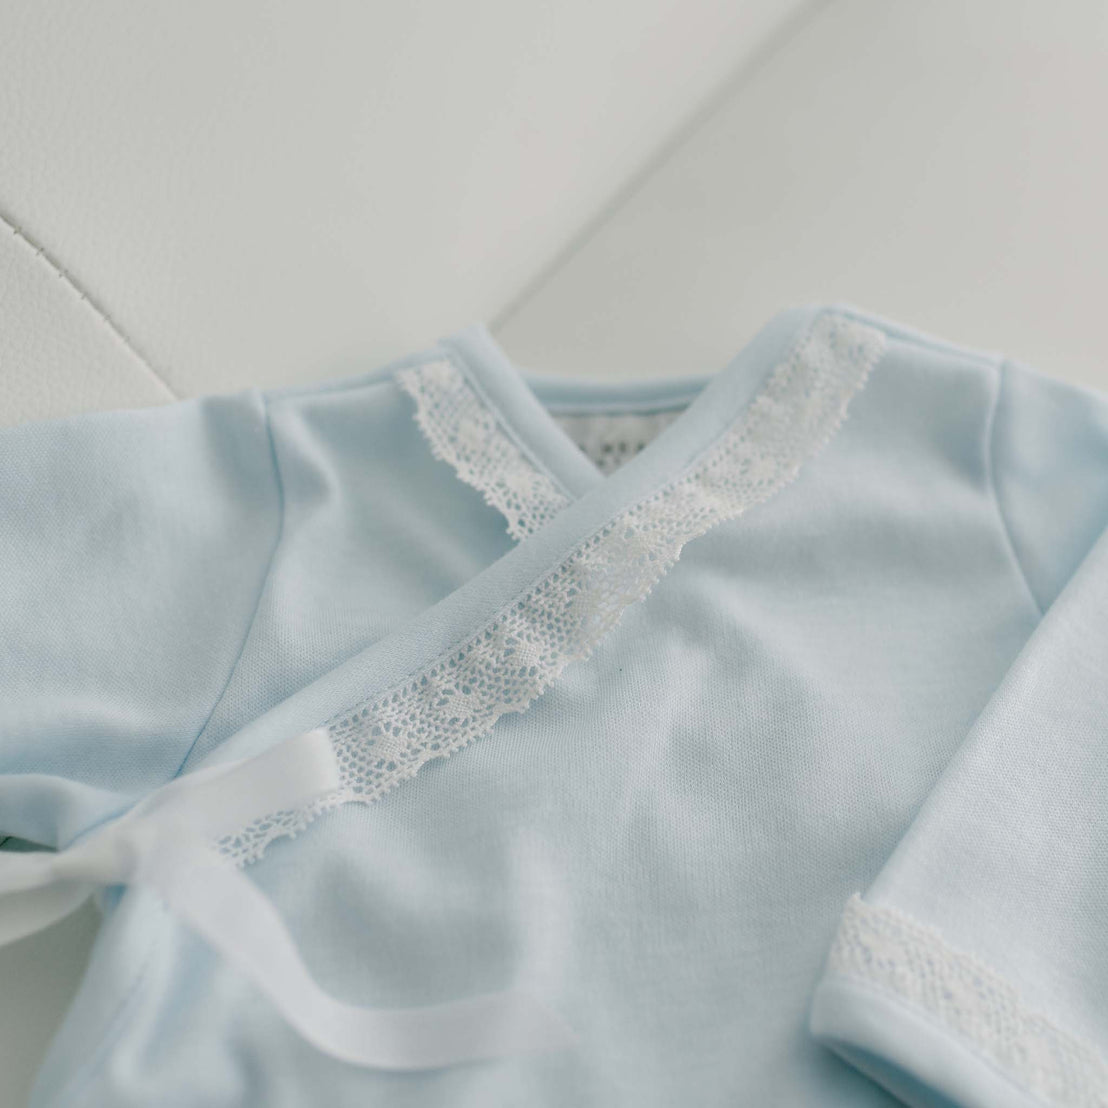 Lace detail on blue cotton baby gown